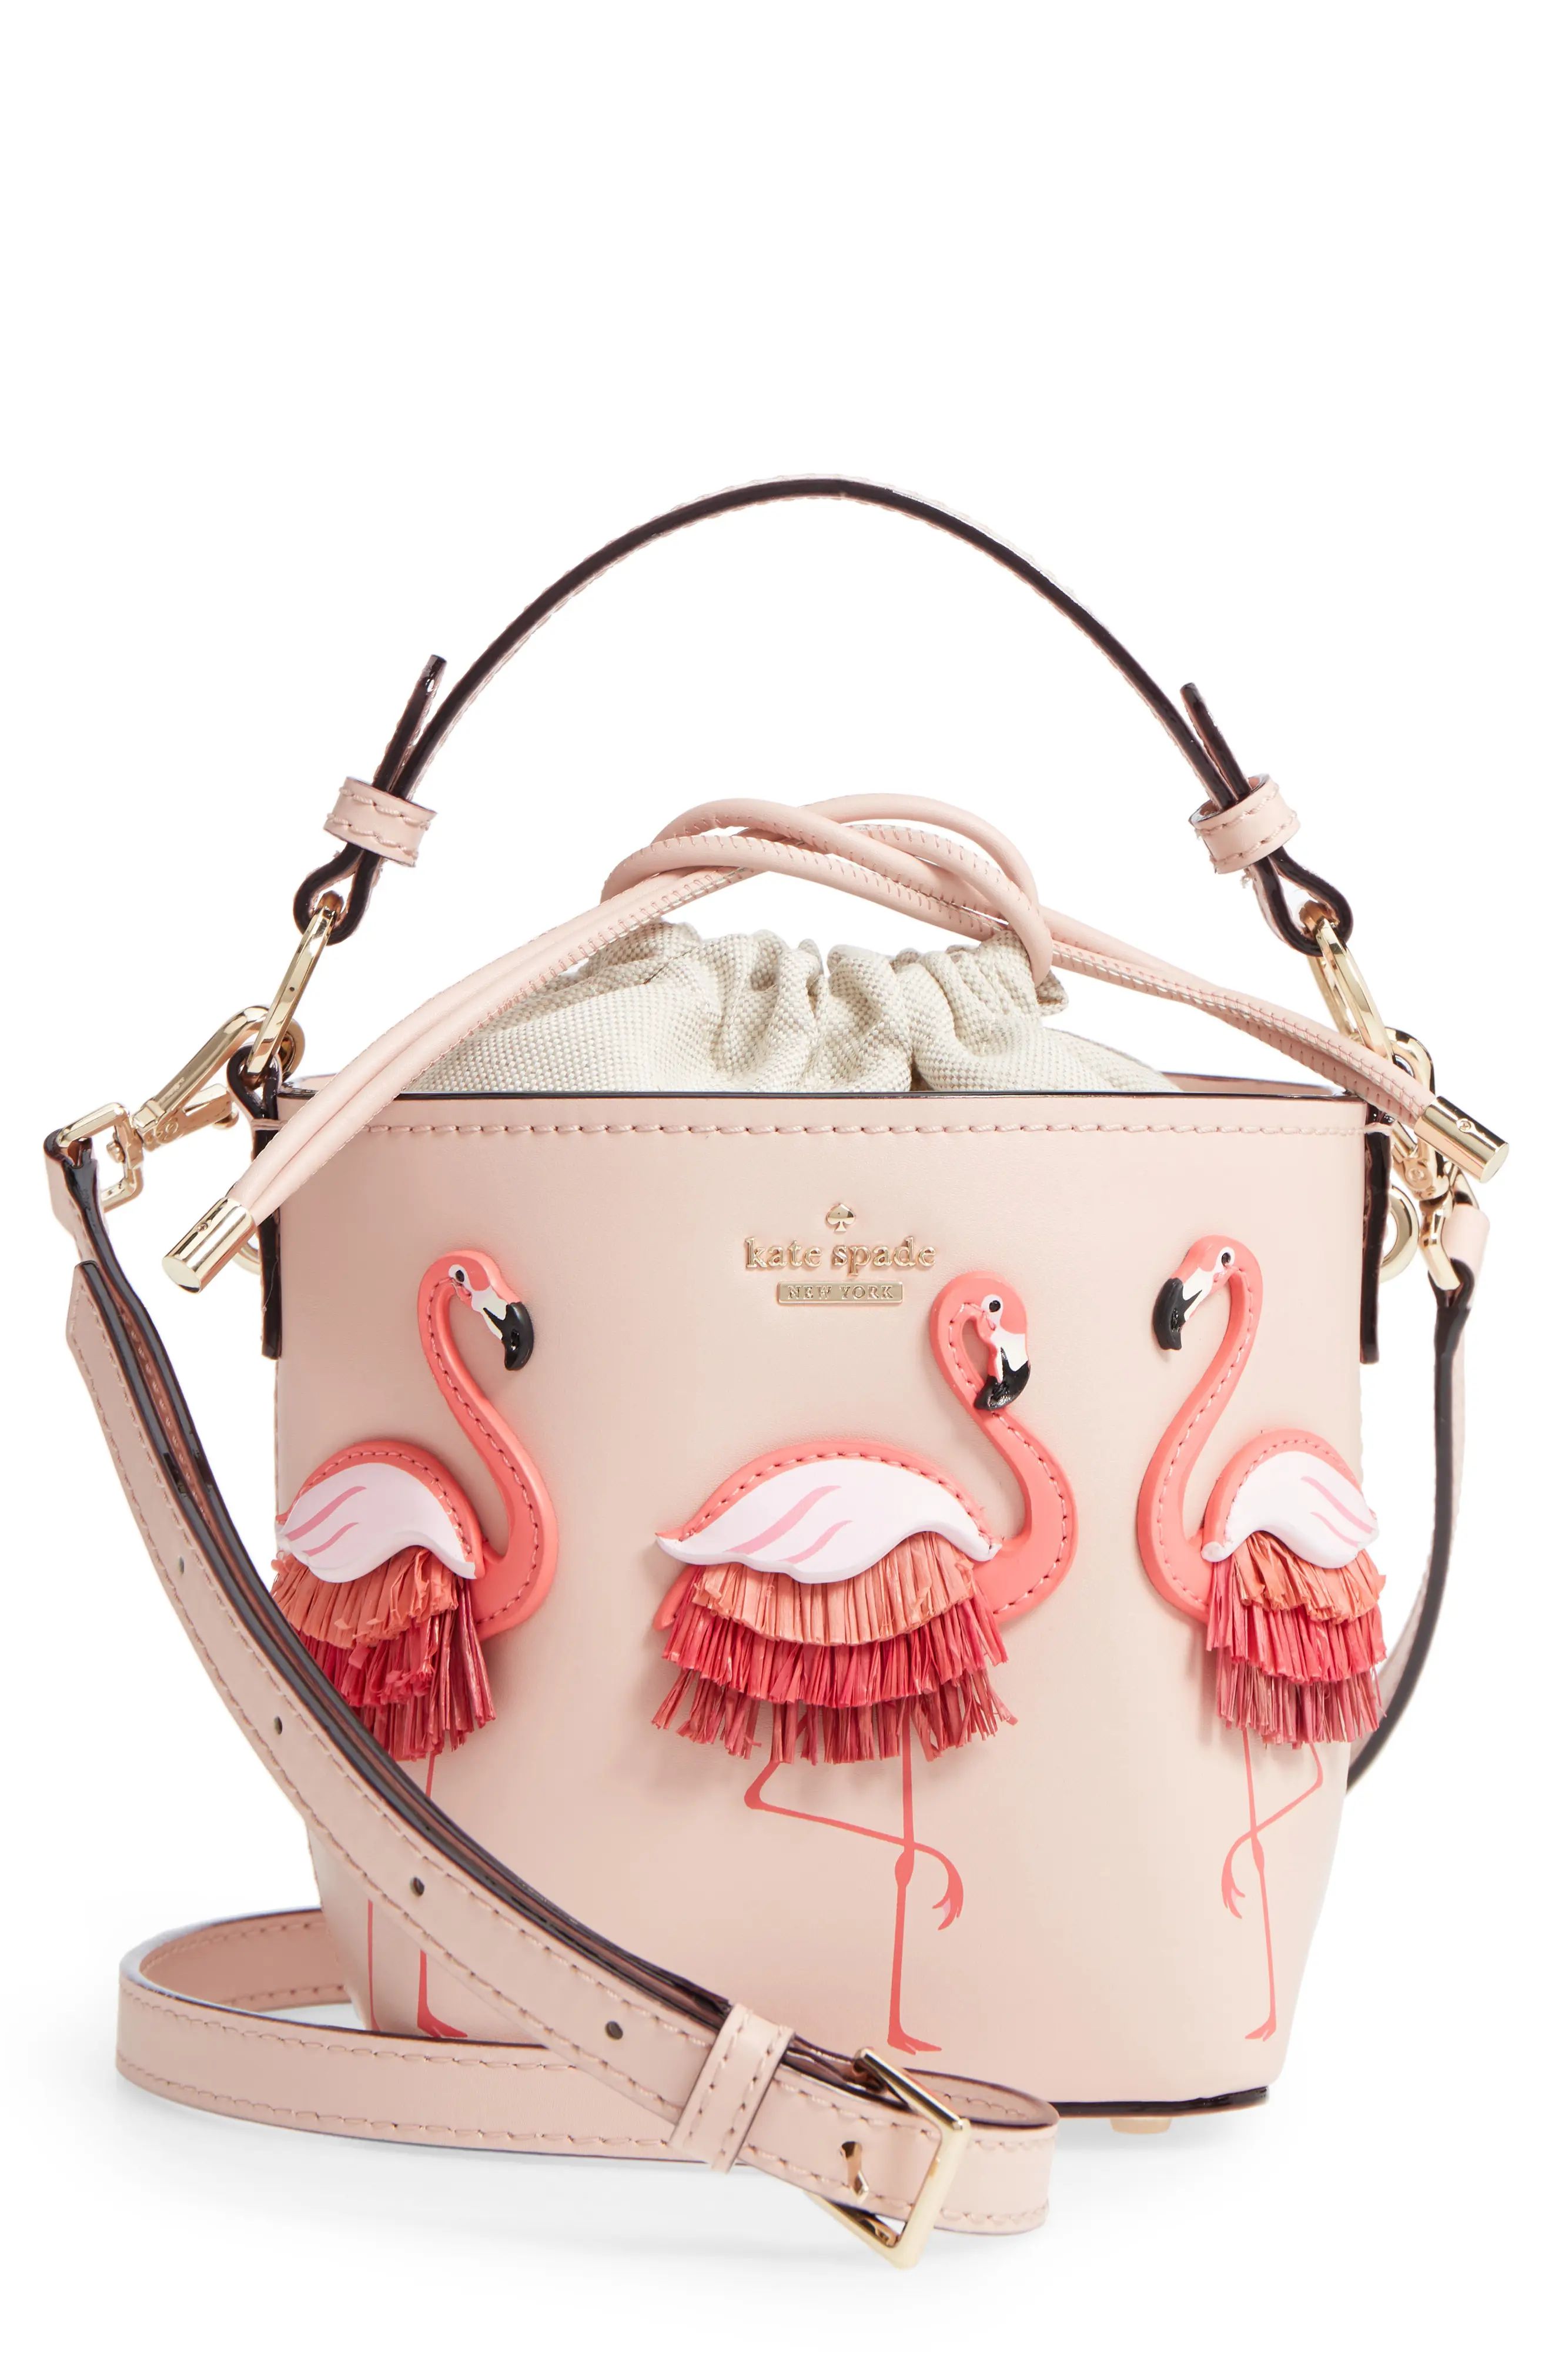 kate spade new york by the pool - flamingo pippa leather bucket bag | Nordstrom